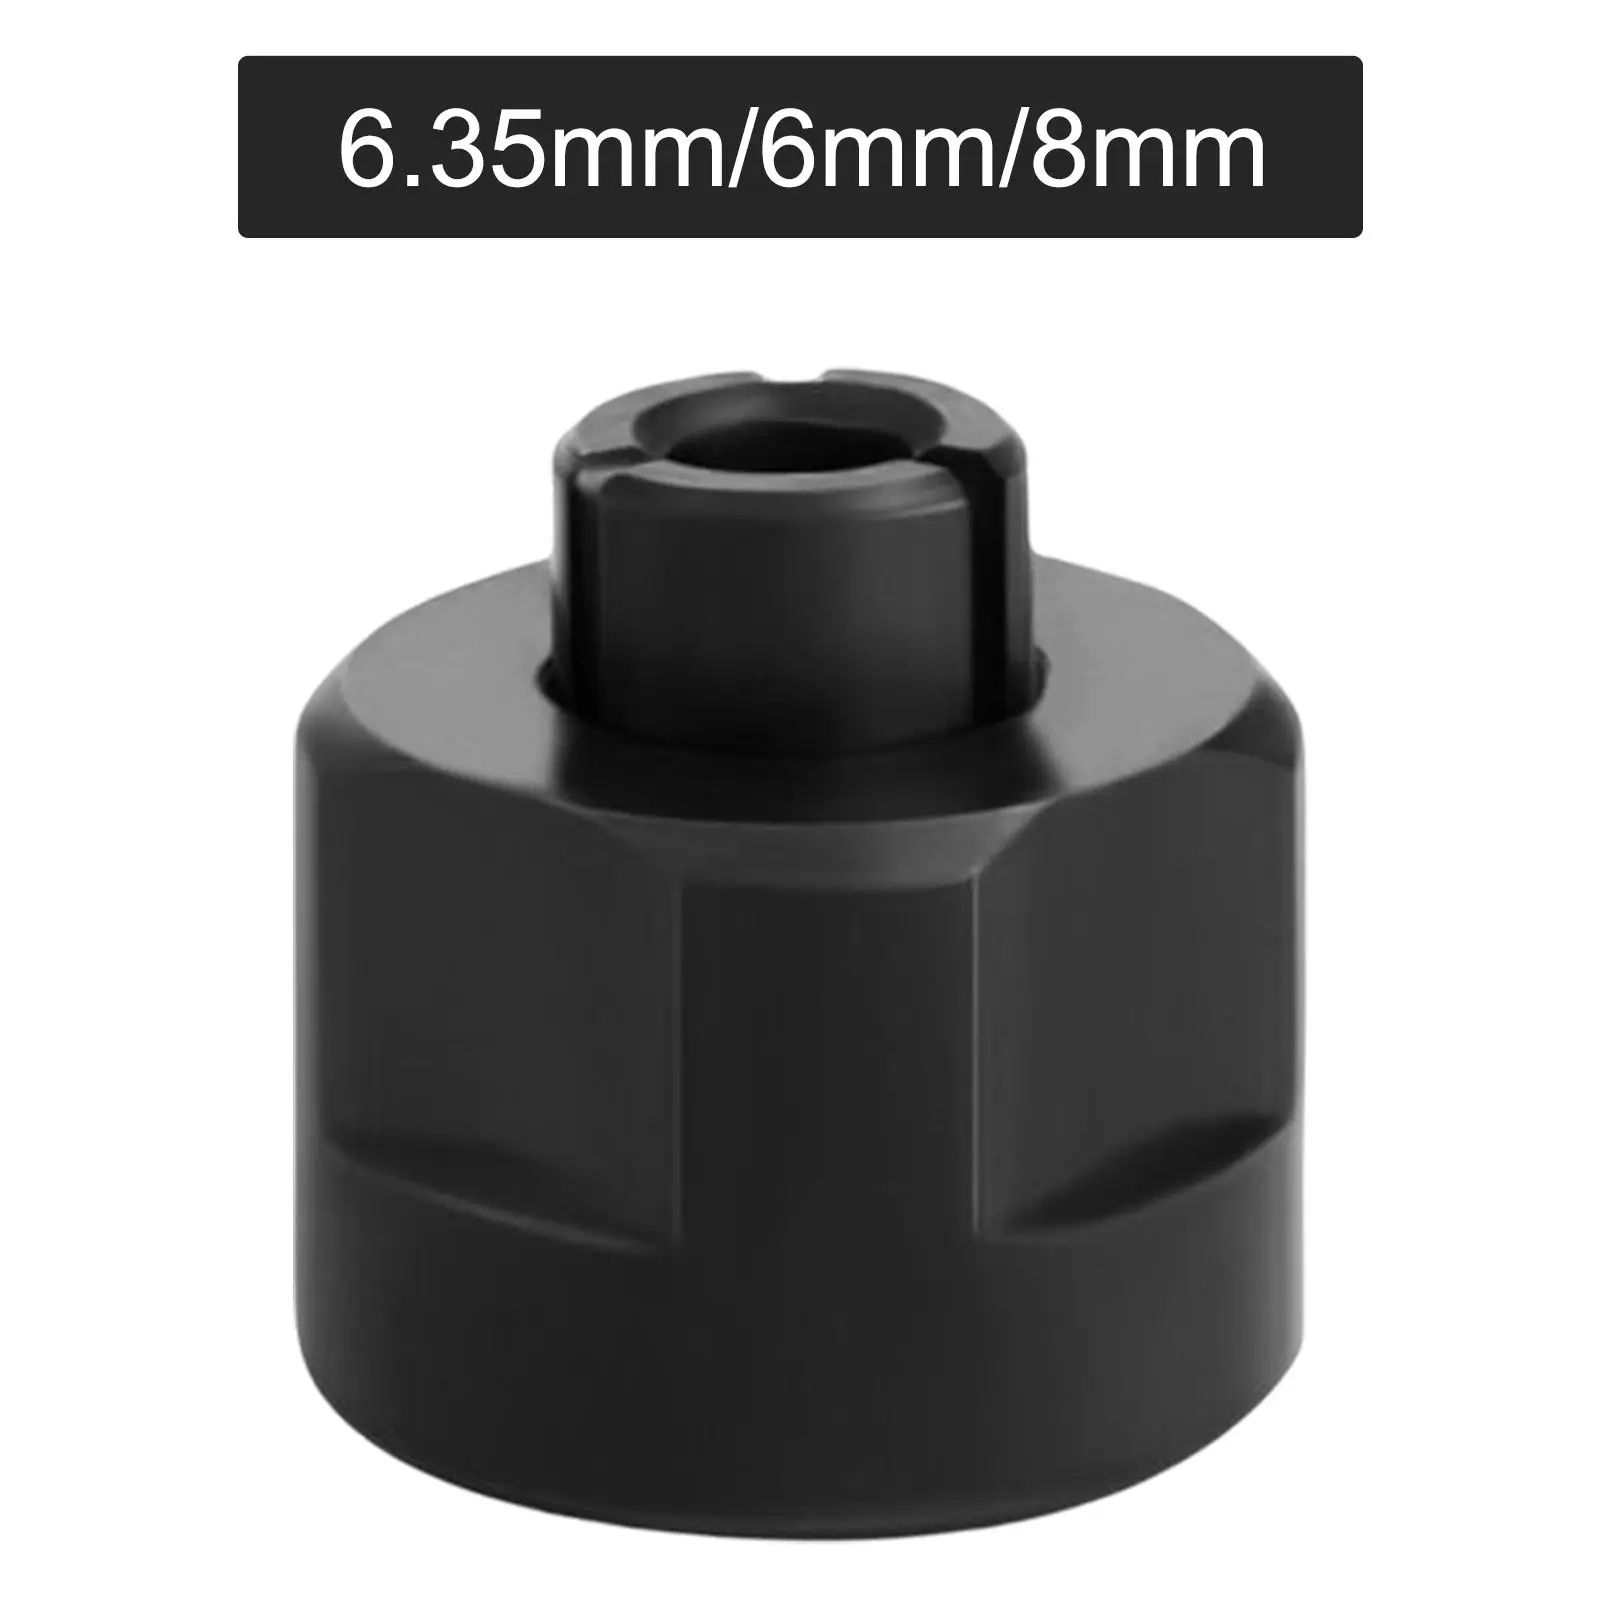 Router Collet Chuck Reduction Sleeve Collet Reduction Connector Shank Nut Adapter for Wood Carving Milling Cutter Accessories